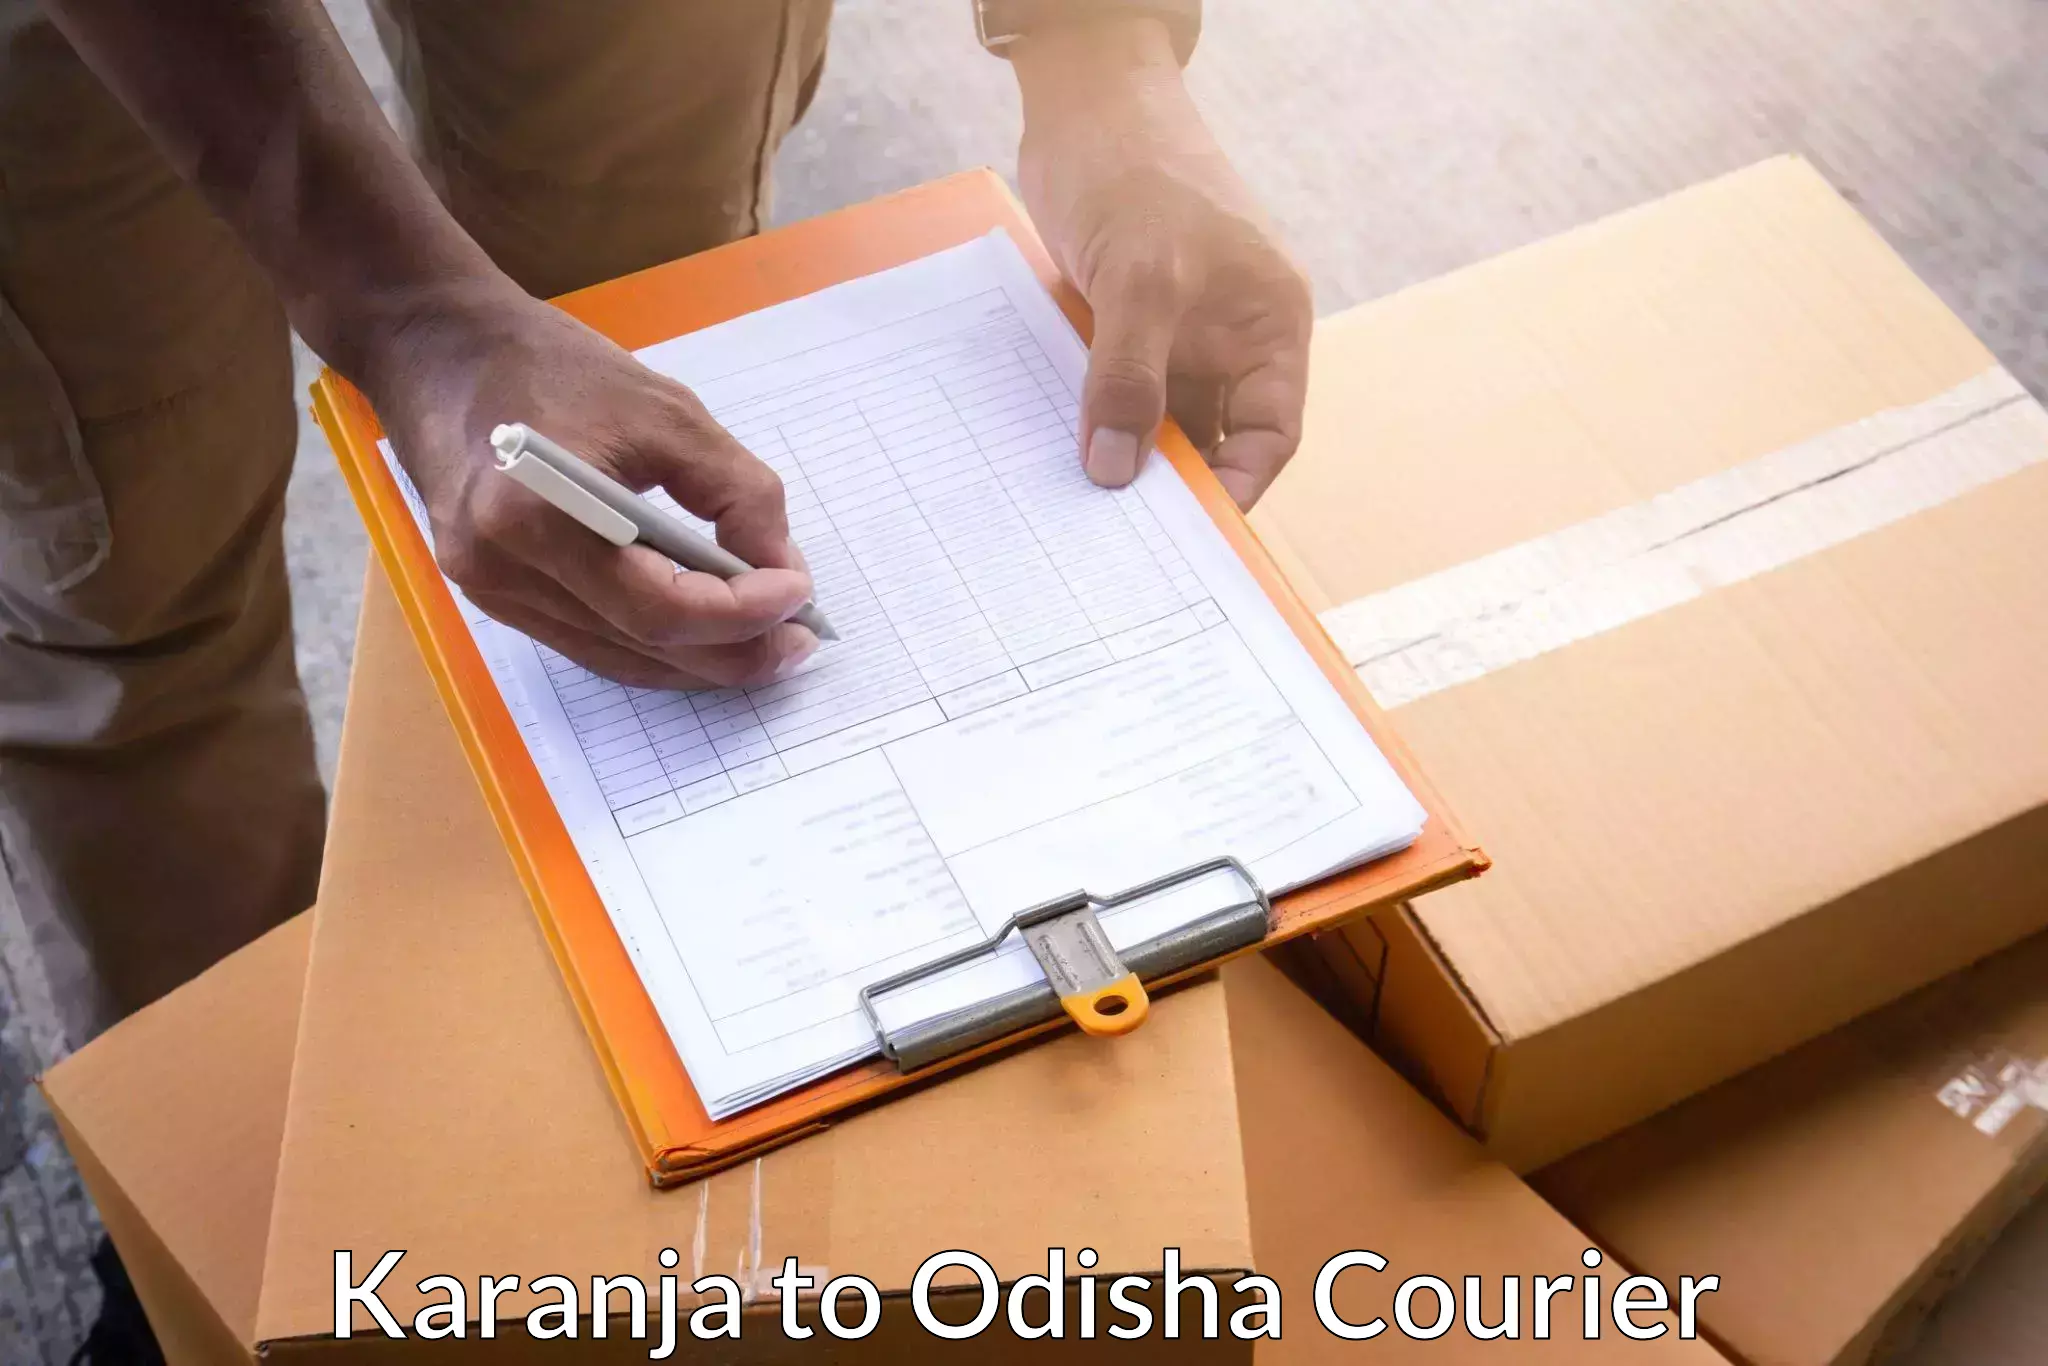 Sustainable shipping practices in Karanja to Sonapur